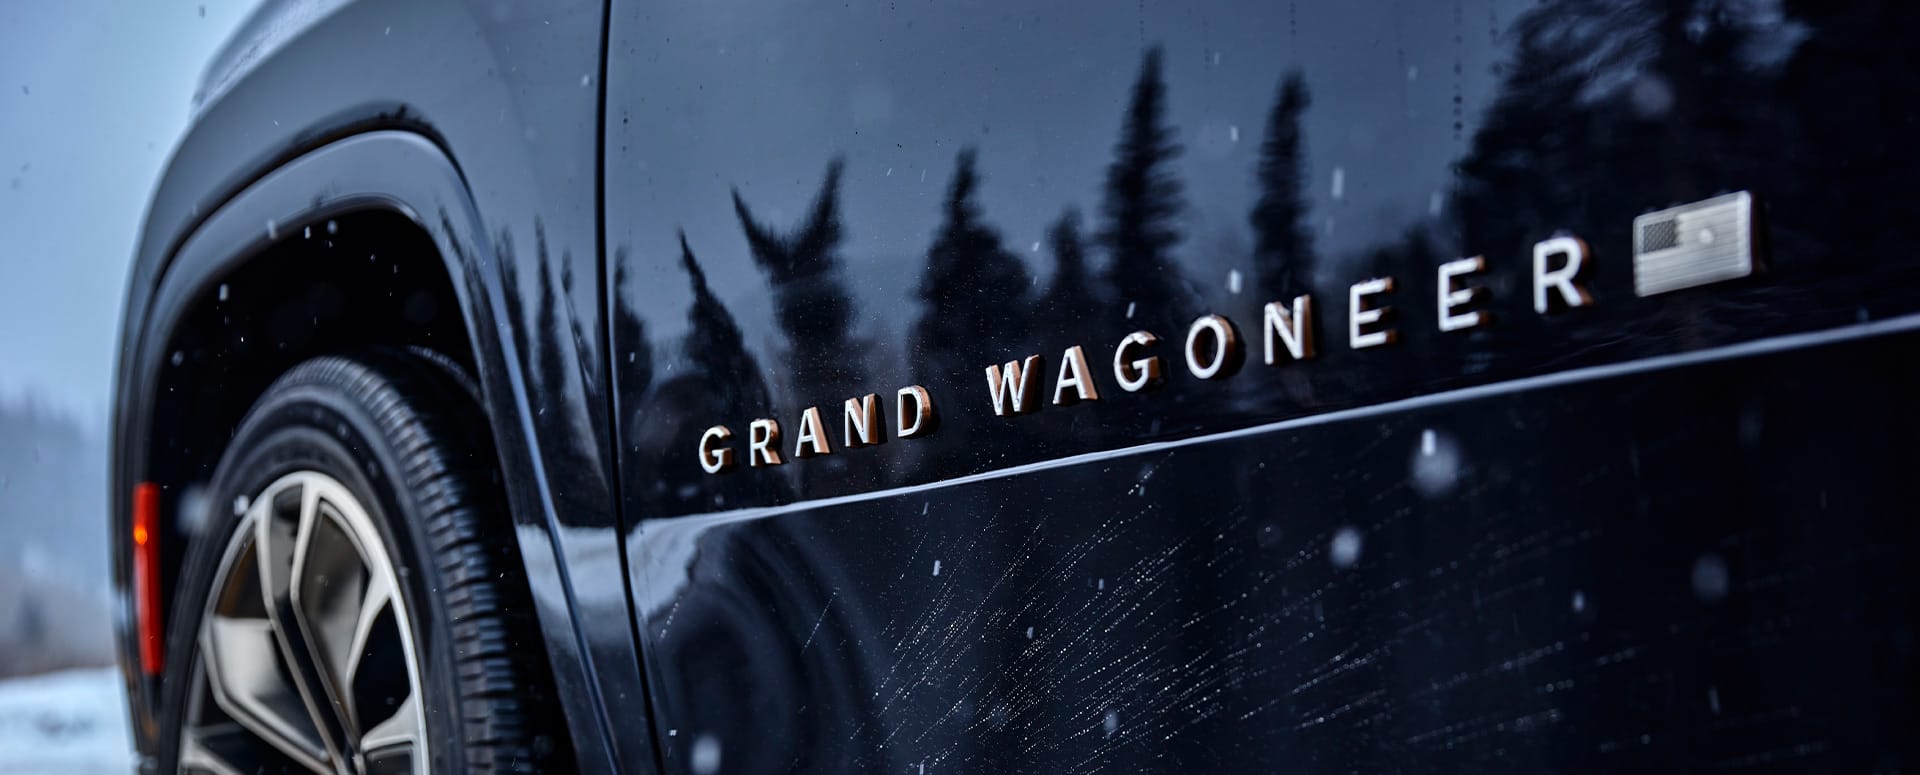 A close-up of the Grand Wagoneer badging on the All-New 2022 Jeep Grand Wagoneer.